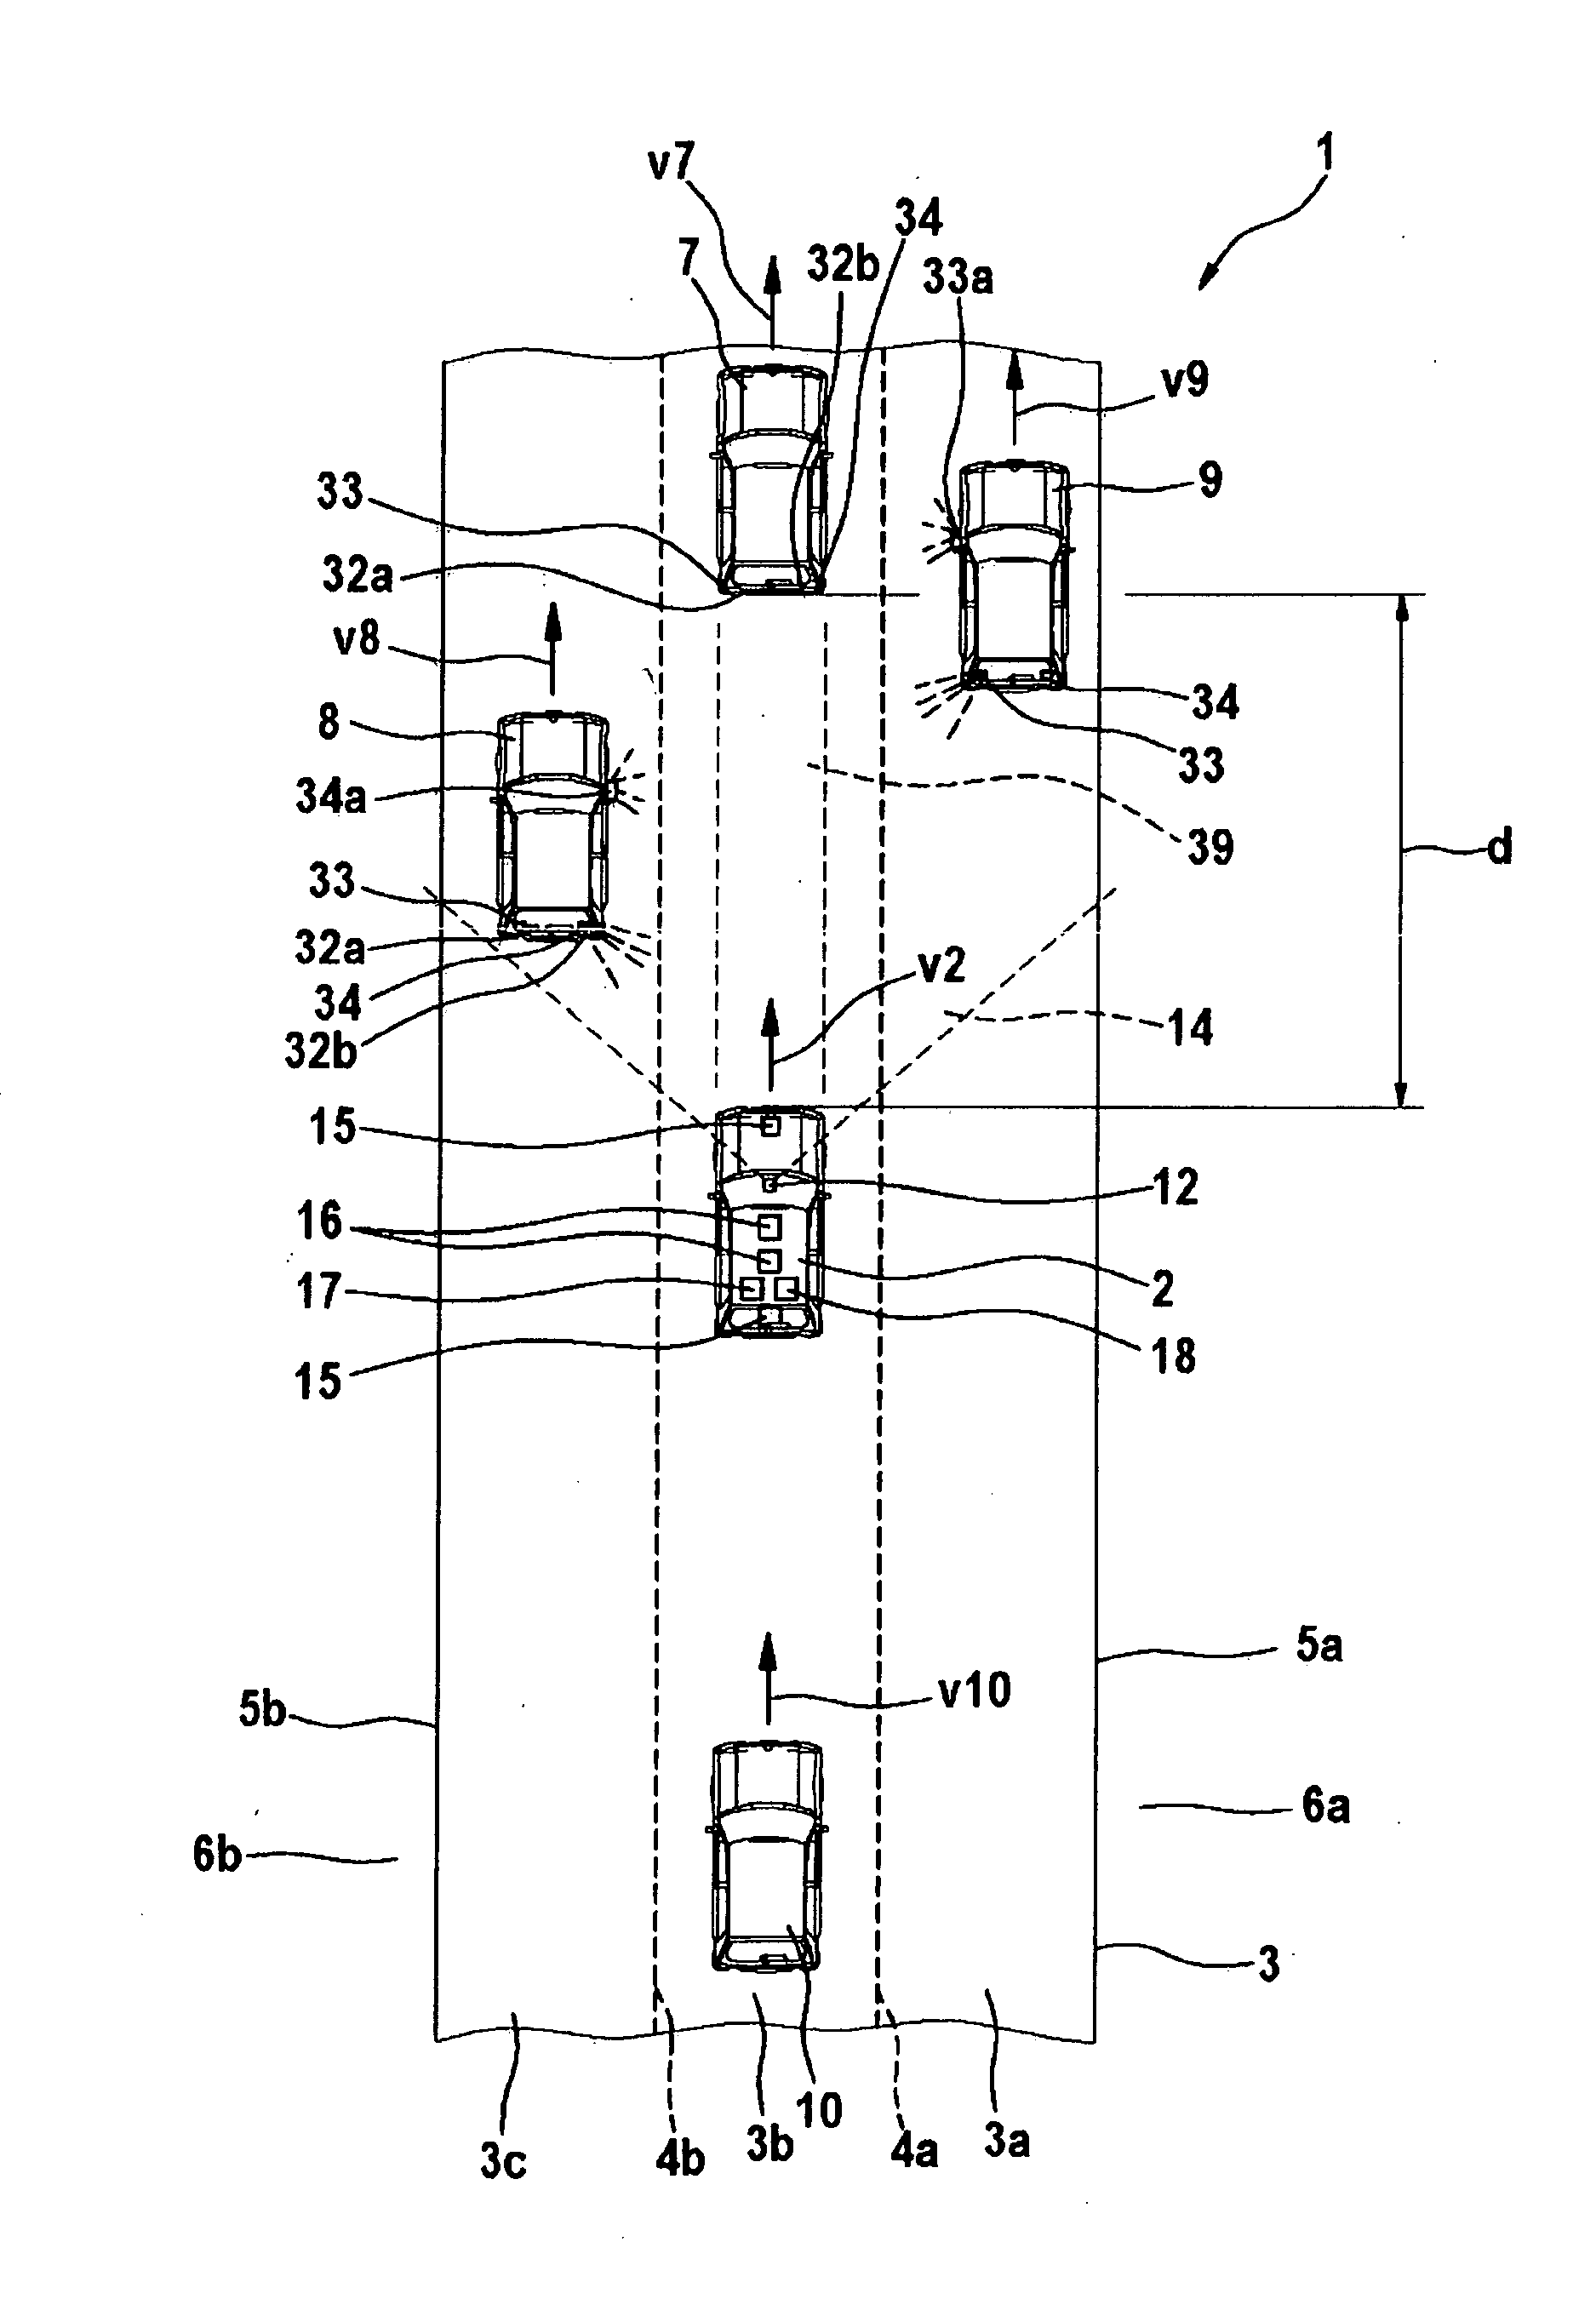 Method for assisting a user of a vehicle, control device for a driver-assistance system of a vehicle and vehicle having such a control device